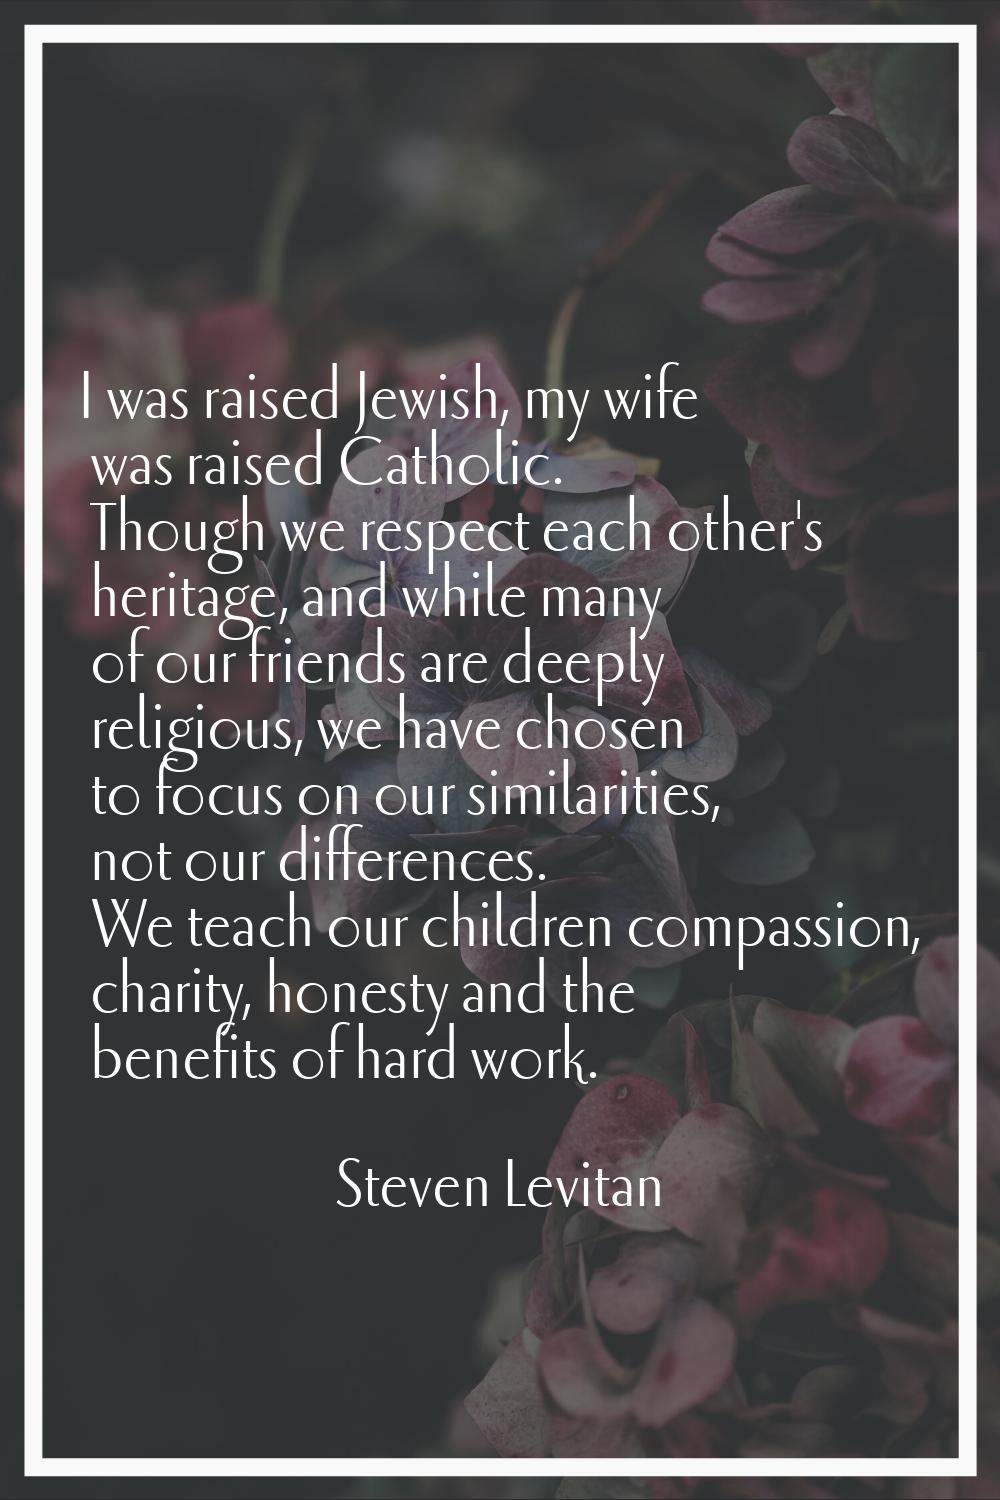 I was raised Jewish, my wife was raised Catholic. Though we respect each other's heritage, and whil